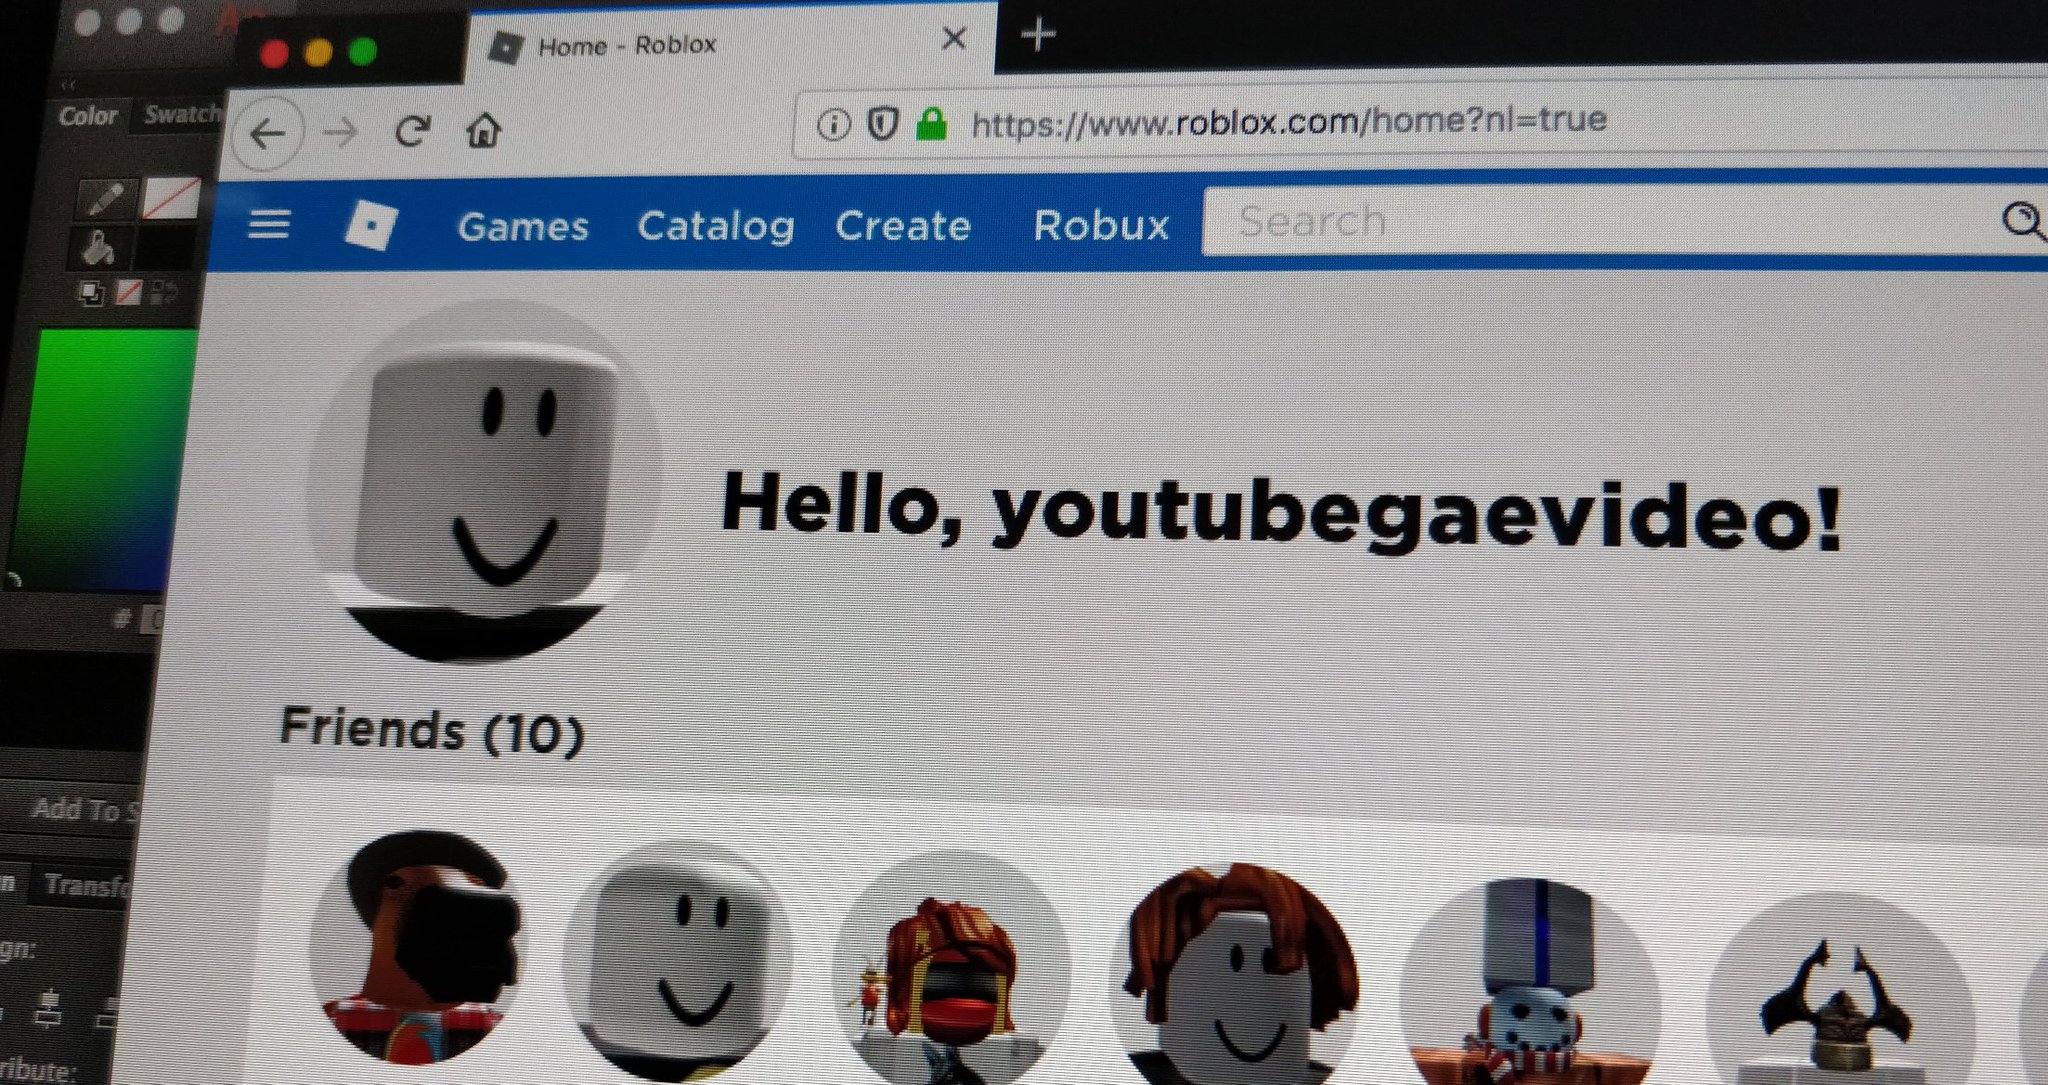 Notglacier On Twitter One Of These Is My Actual Account - https://www.roblox.com/home?nl=true